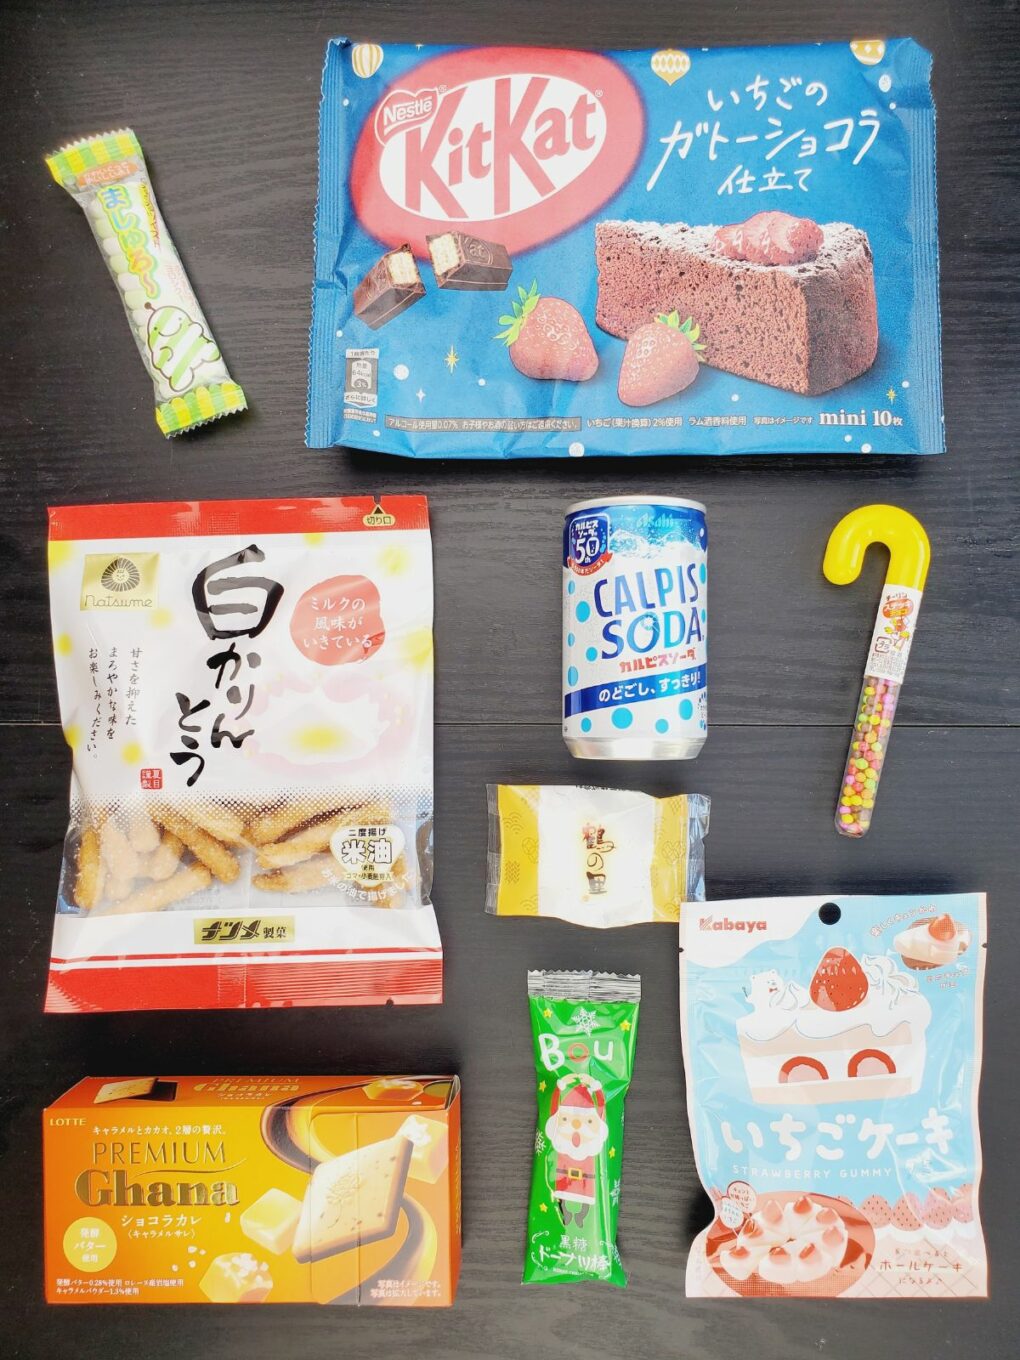 all of the sweet tokyo treats snacks laid out on the table.